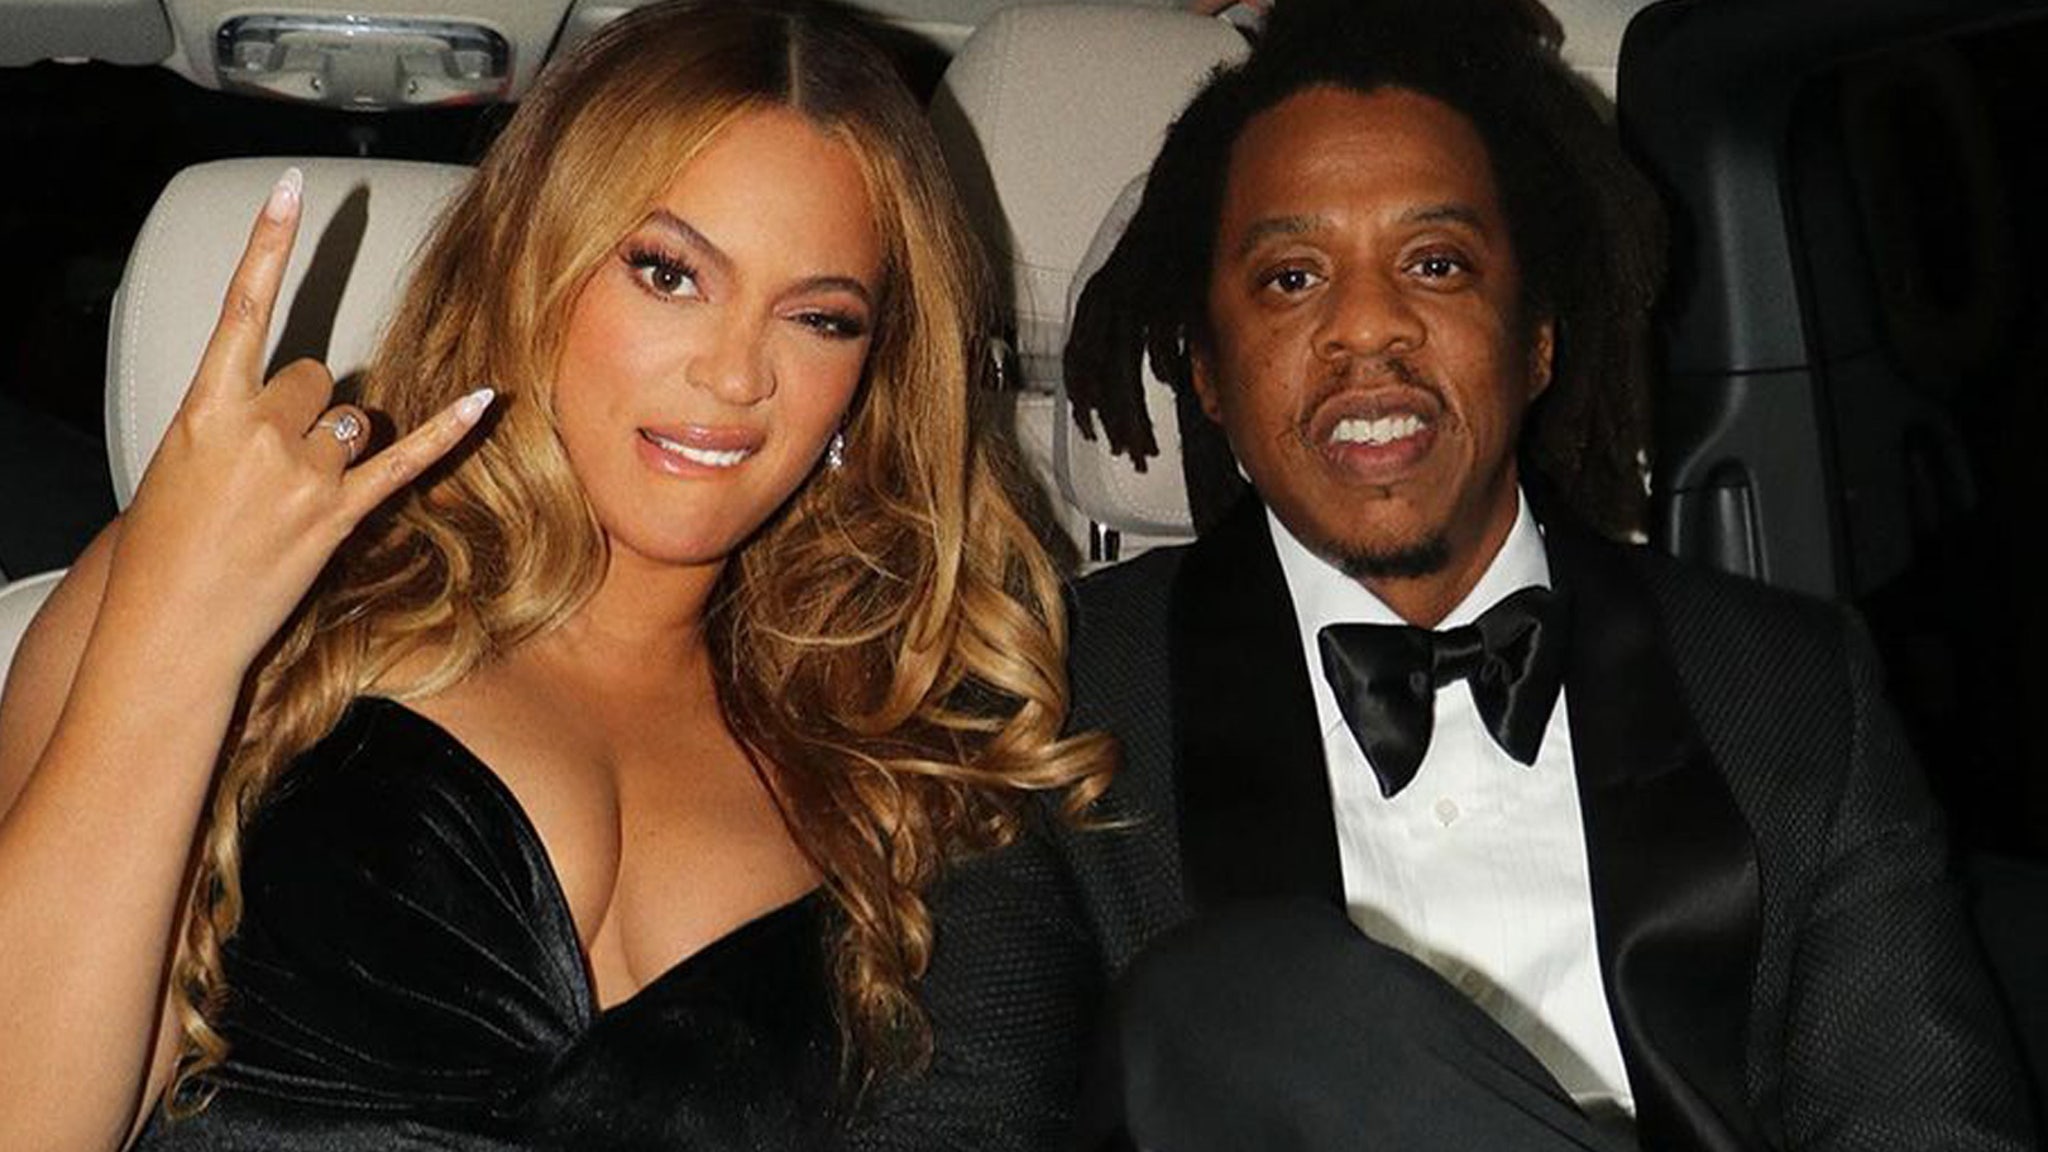 Beyonce and Jay-Z Get Black Tie Ready for The Harder They Fall Premiere